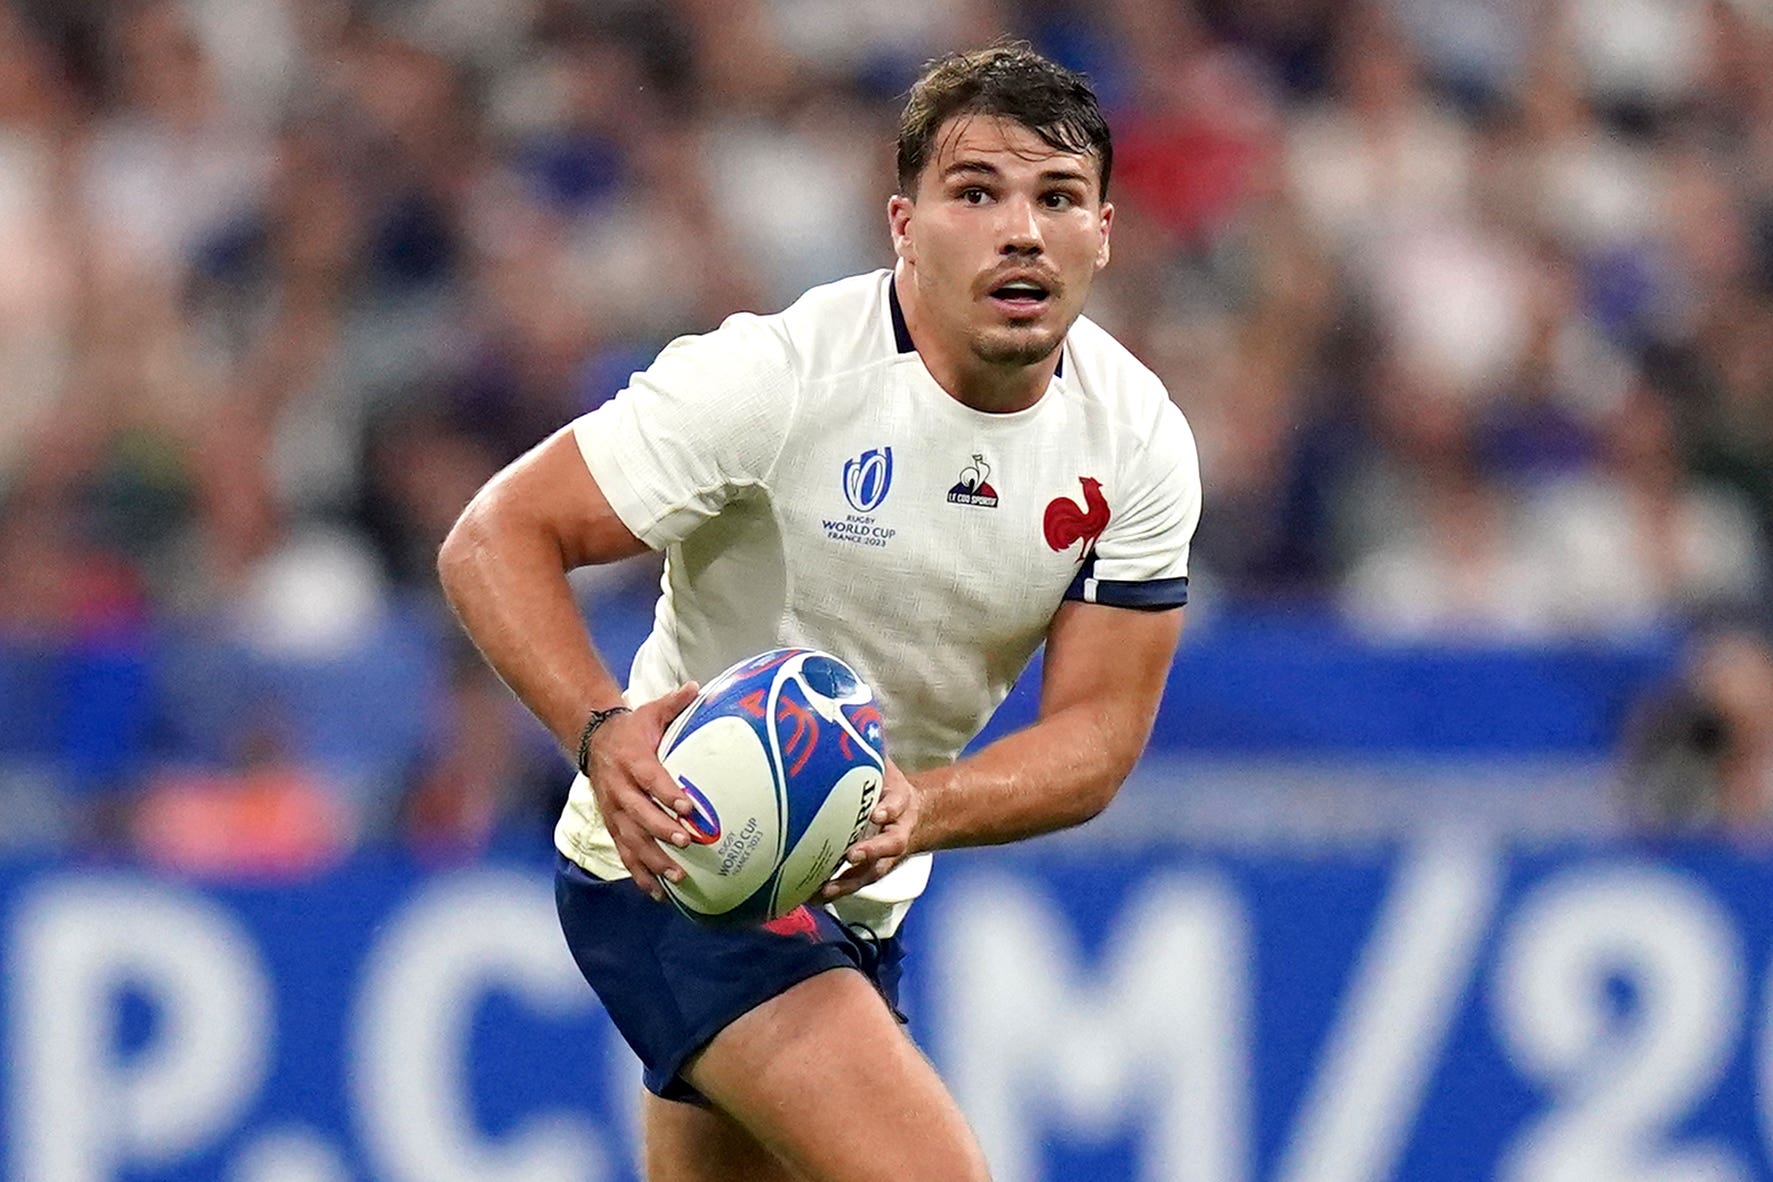 Antoine Dupont is set to make his debut for the French sevens team